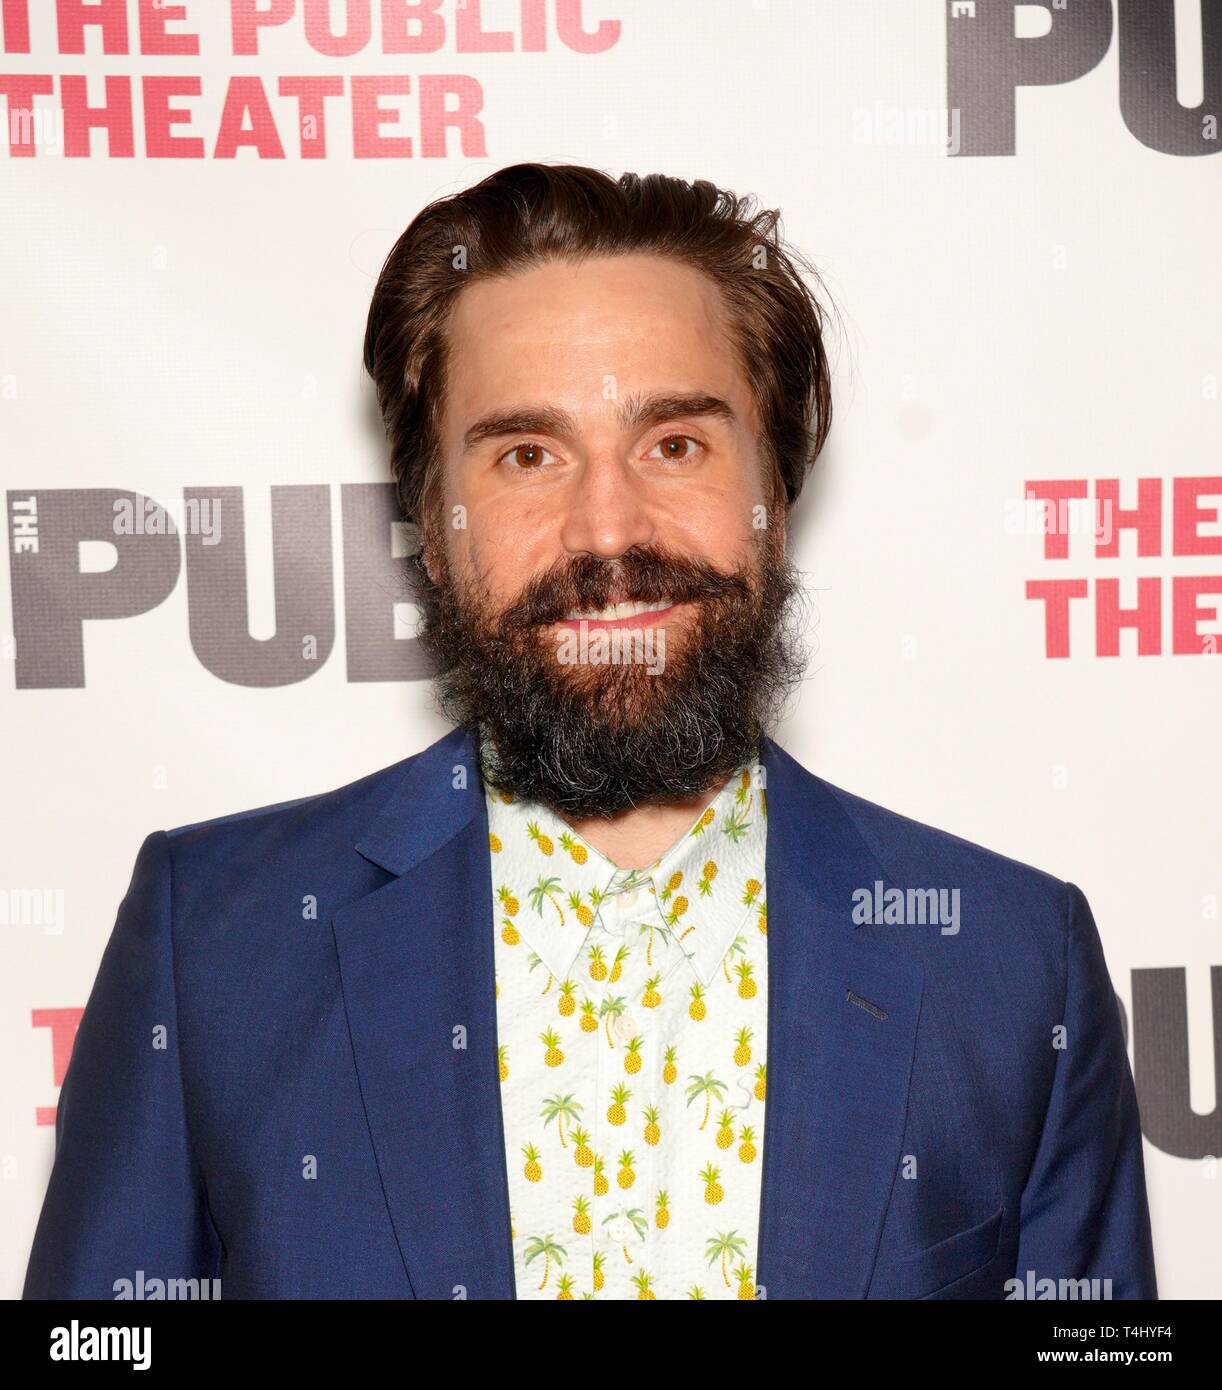 New York, NY, USA. 16th Apr, 2019. Joe Tapper at arrivals for SOCRATES Opening Night on Broadway, The Public Theater, New York, NY April 16, 2019. Credit: Eli Winston/Everett Collection/Alamy Live News Stock Photo